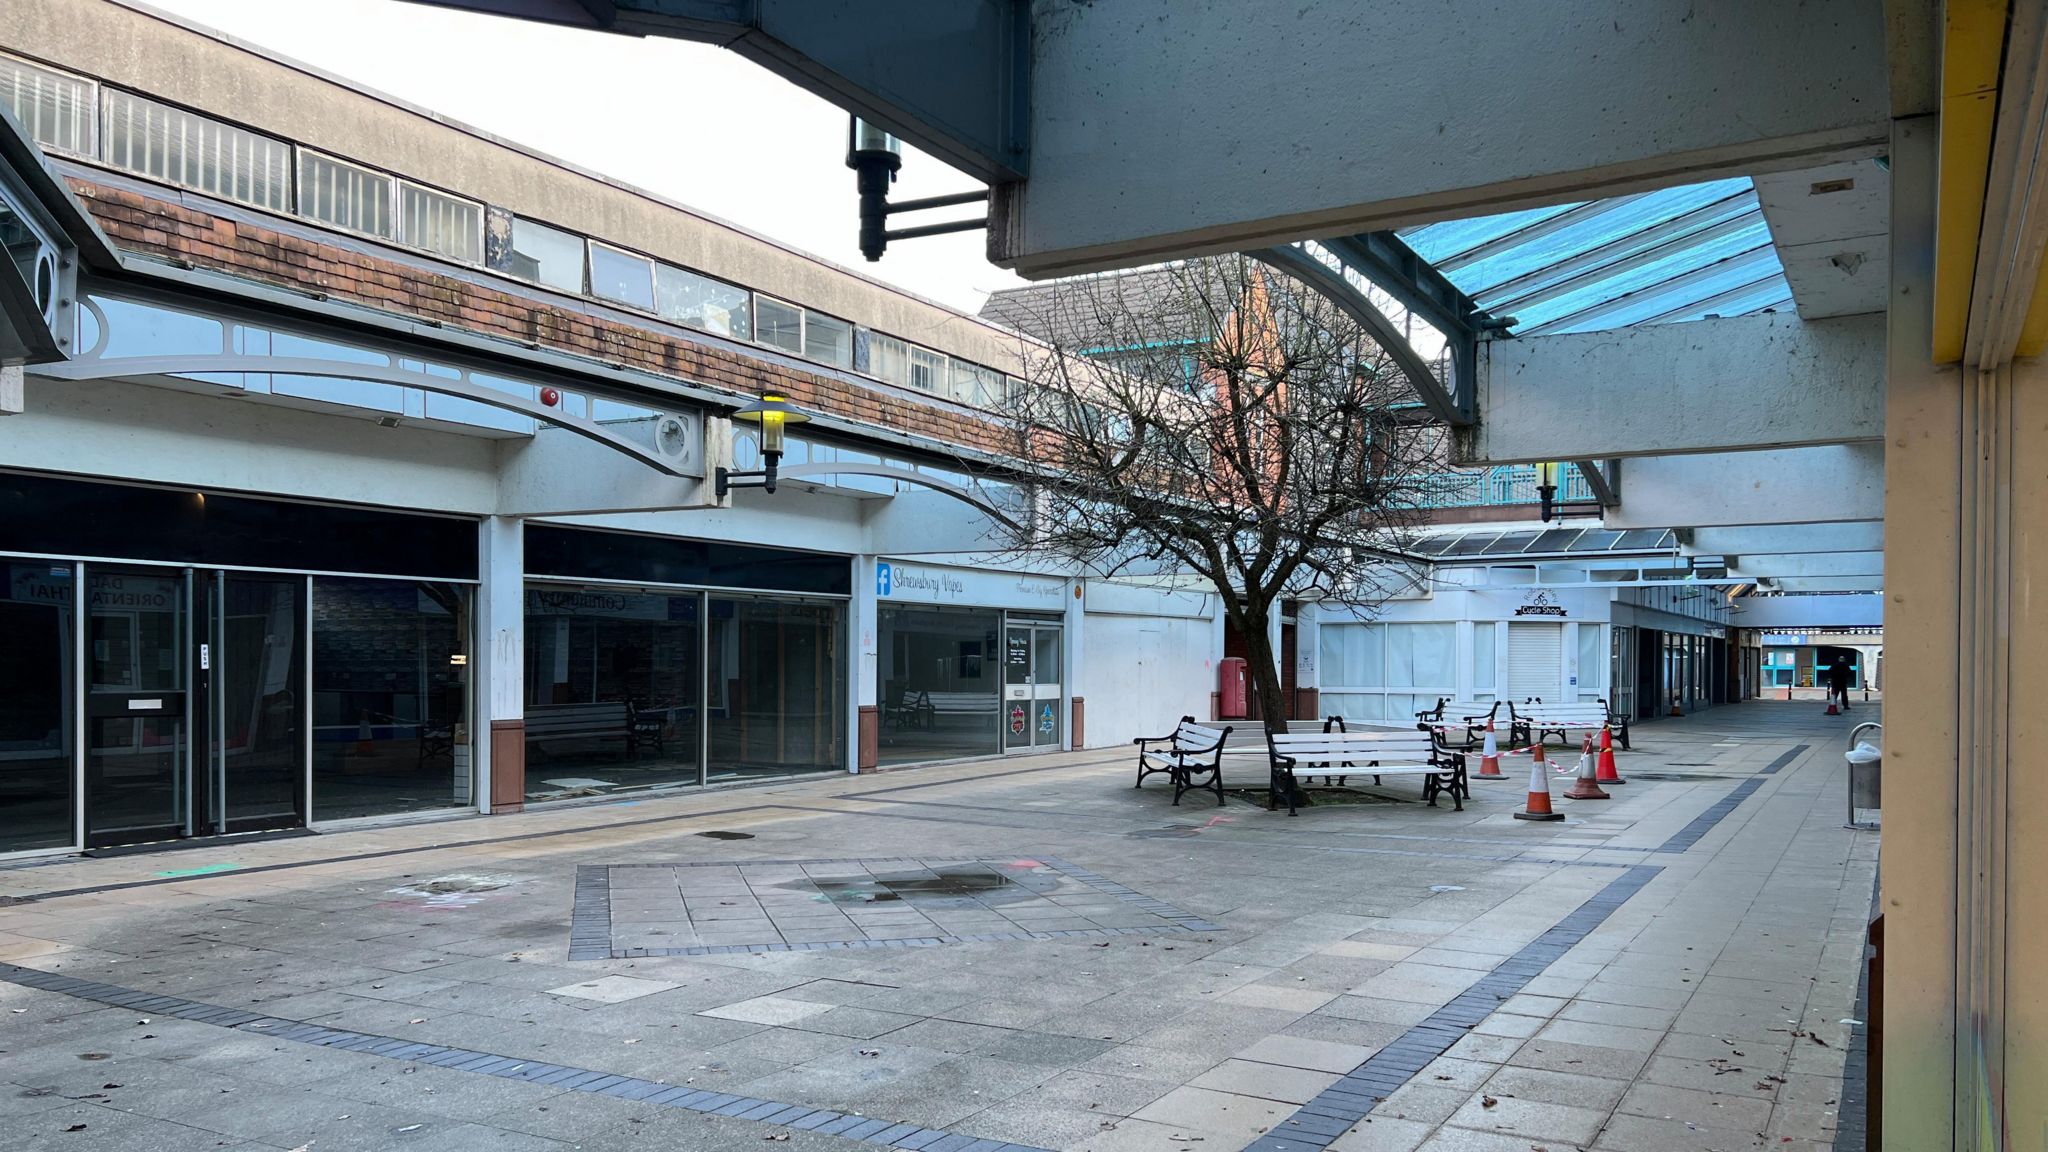 Inside the old Riverside shopping centre, empty shops and a tree